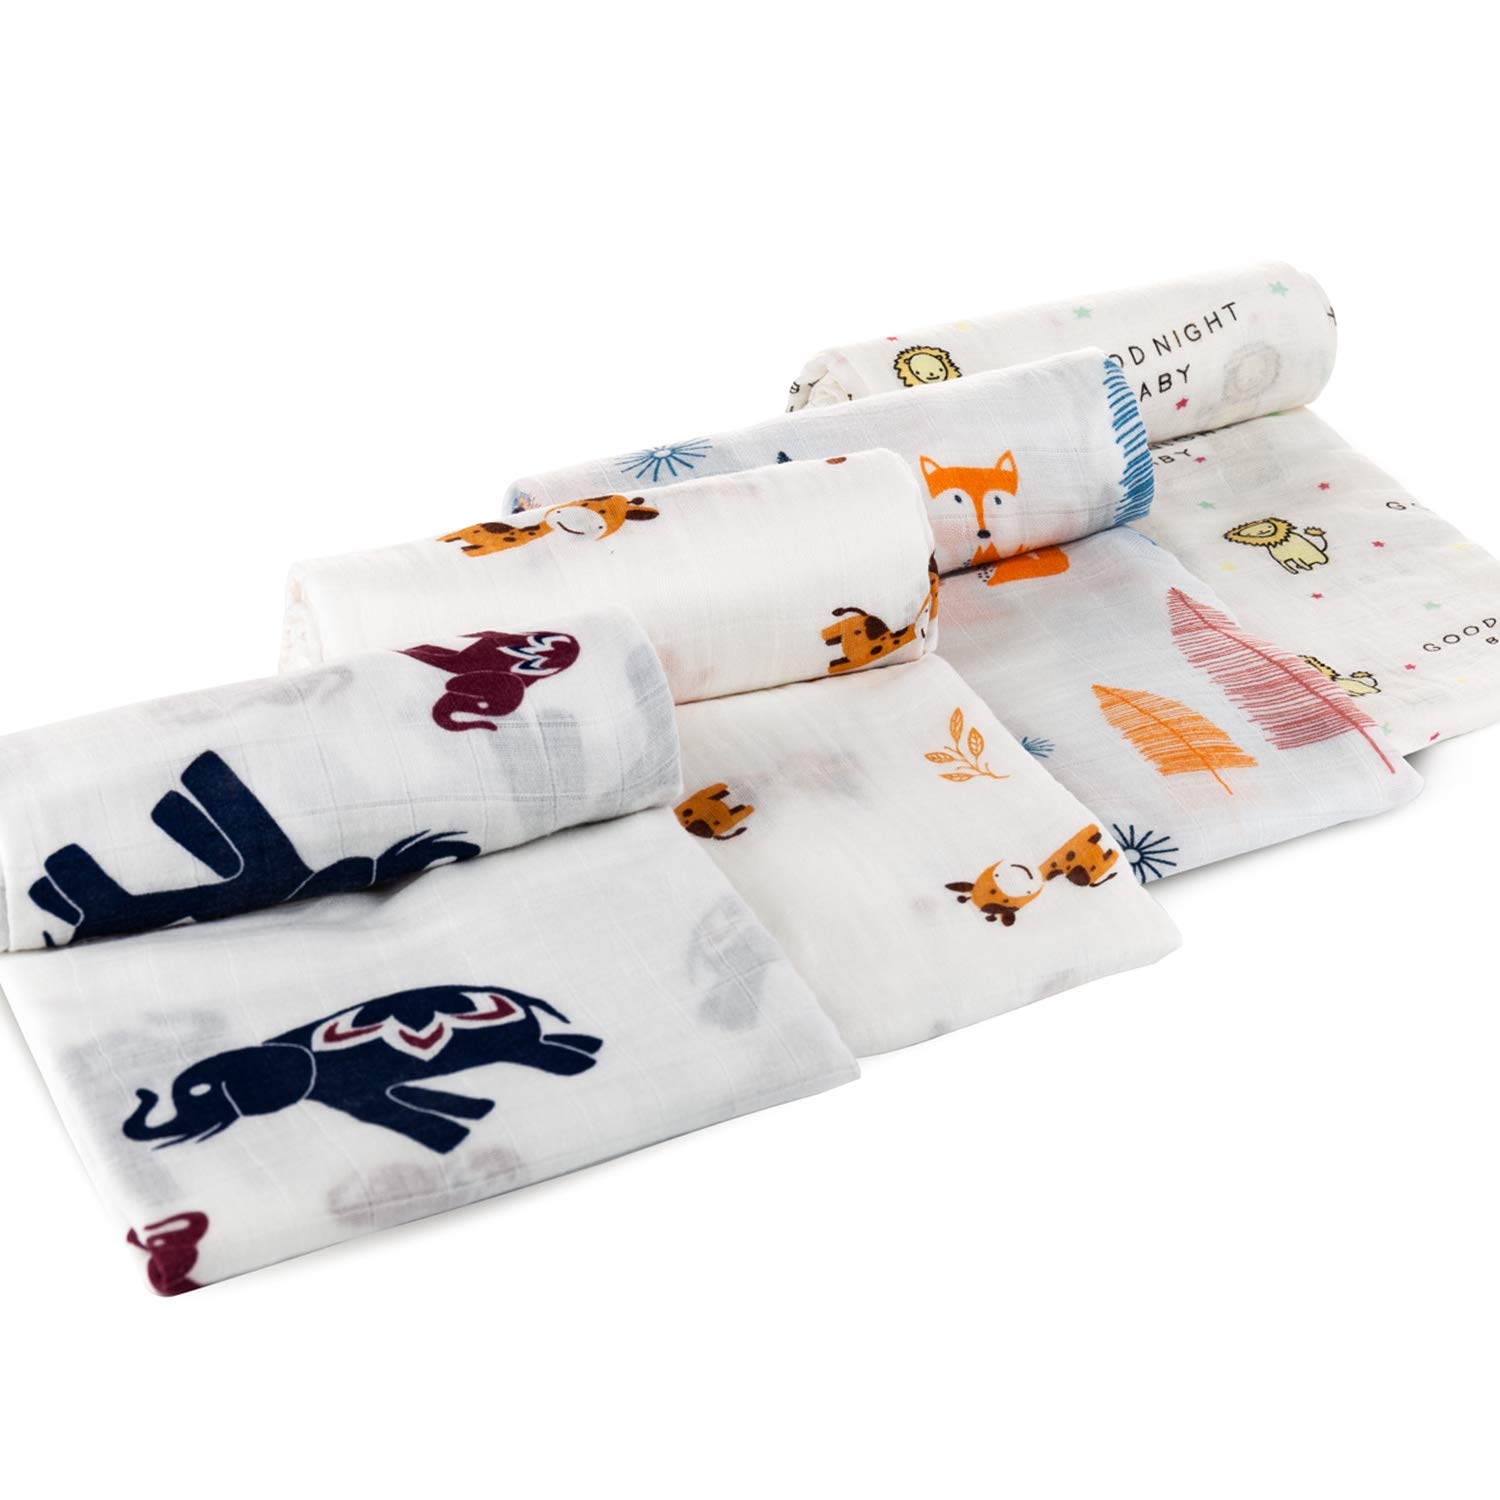 upsimples Baby Swaddle Blanket Unisex Swaddle Wrap Soft Silky Muslin Swaddle Blankets Neutral Receiving Blanket for Boys and Girls, Large 47 x 47 inches, Set of 4-Sika Deer/Elephant/Lion/Fox